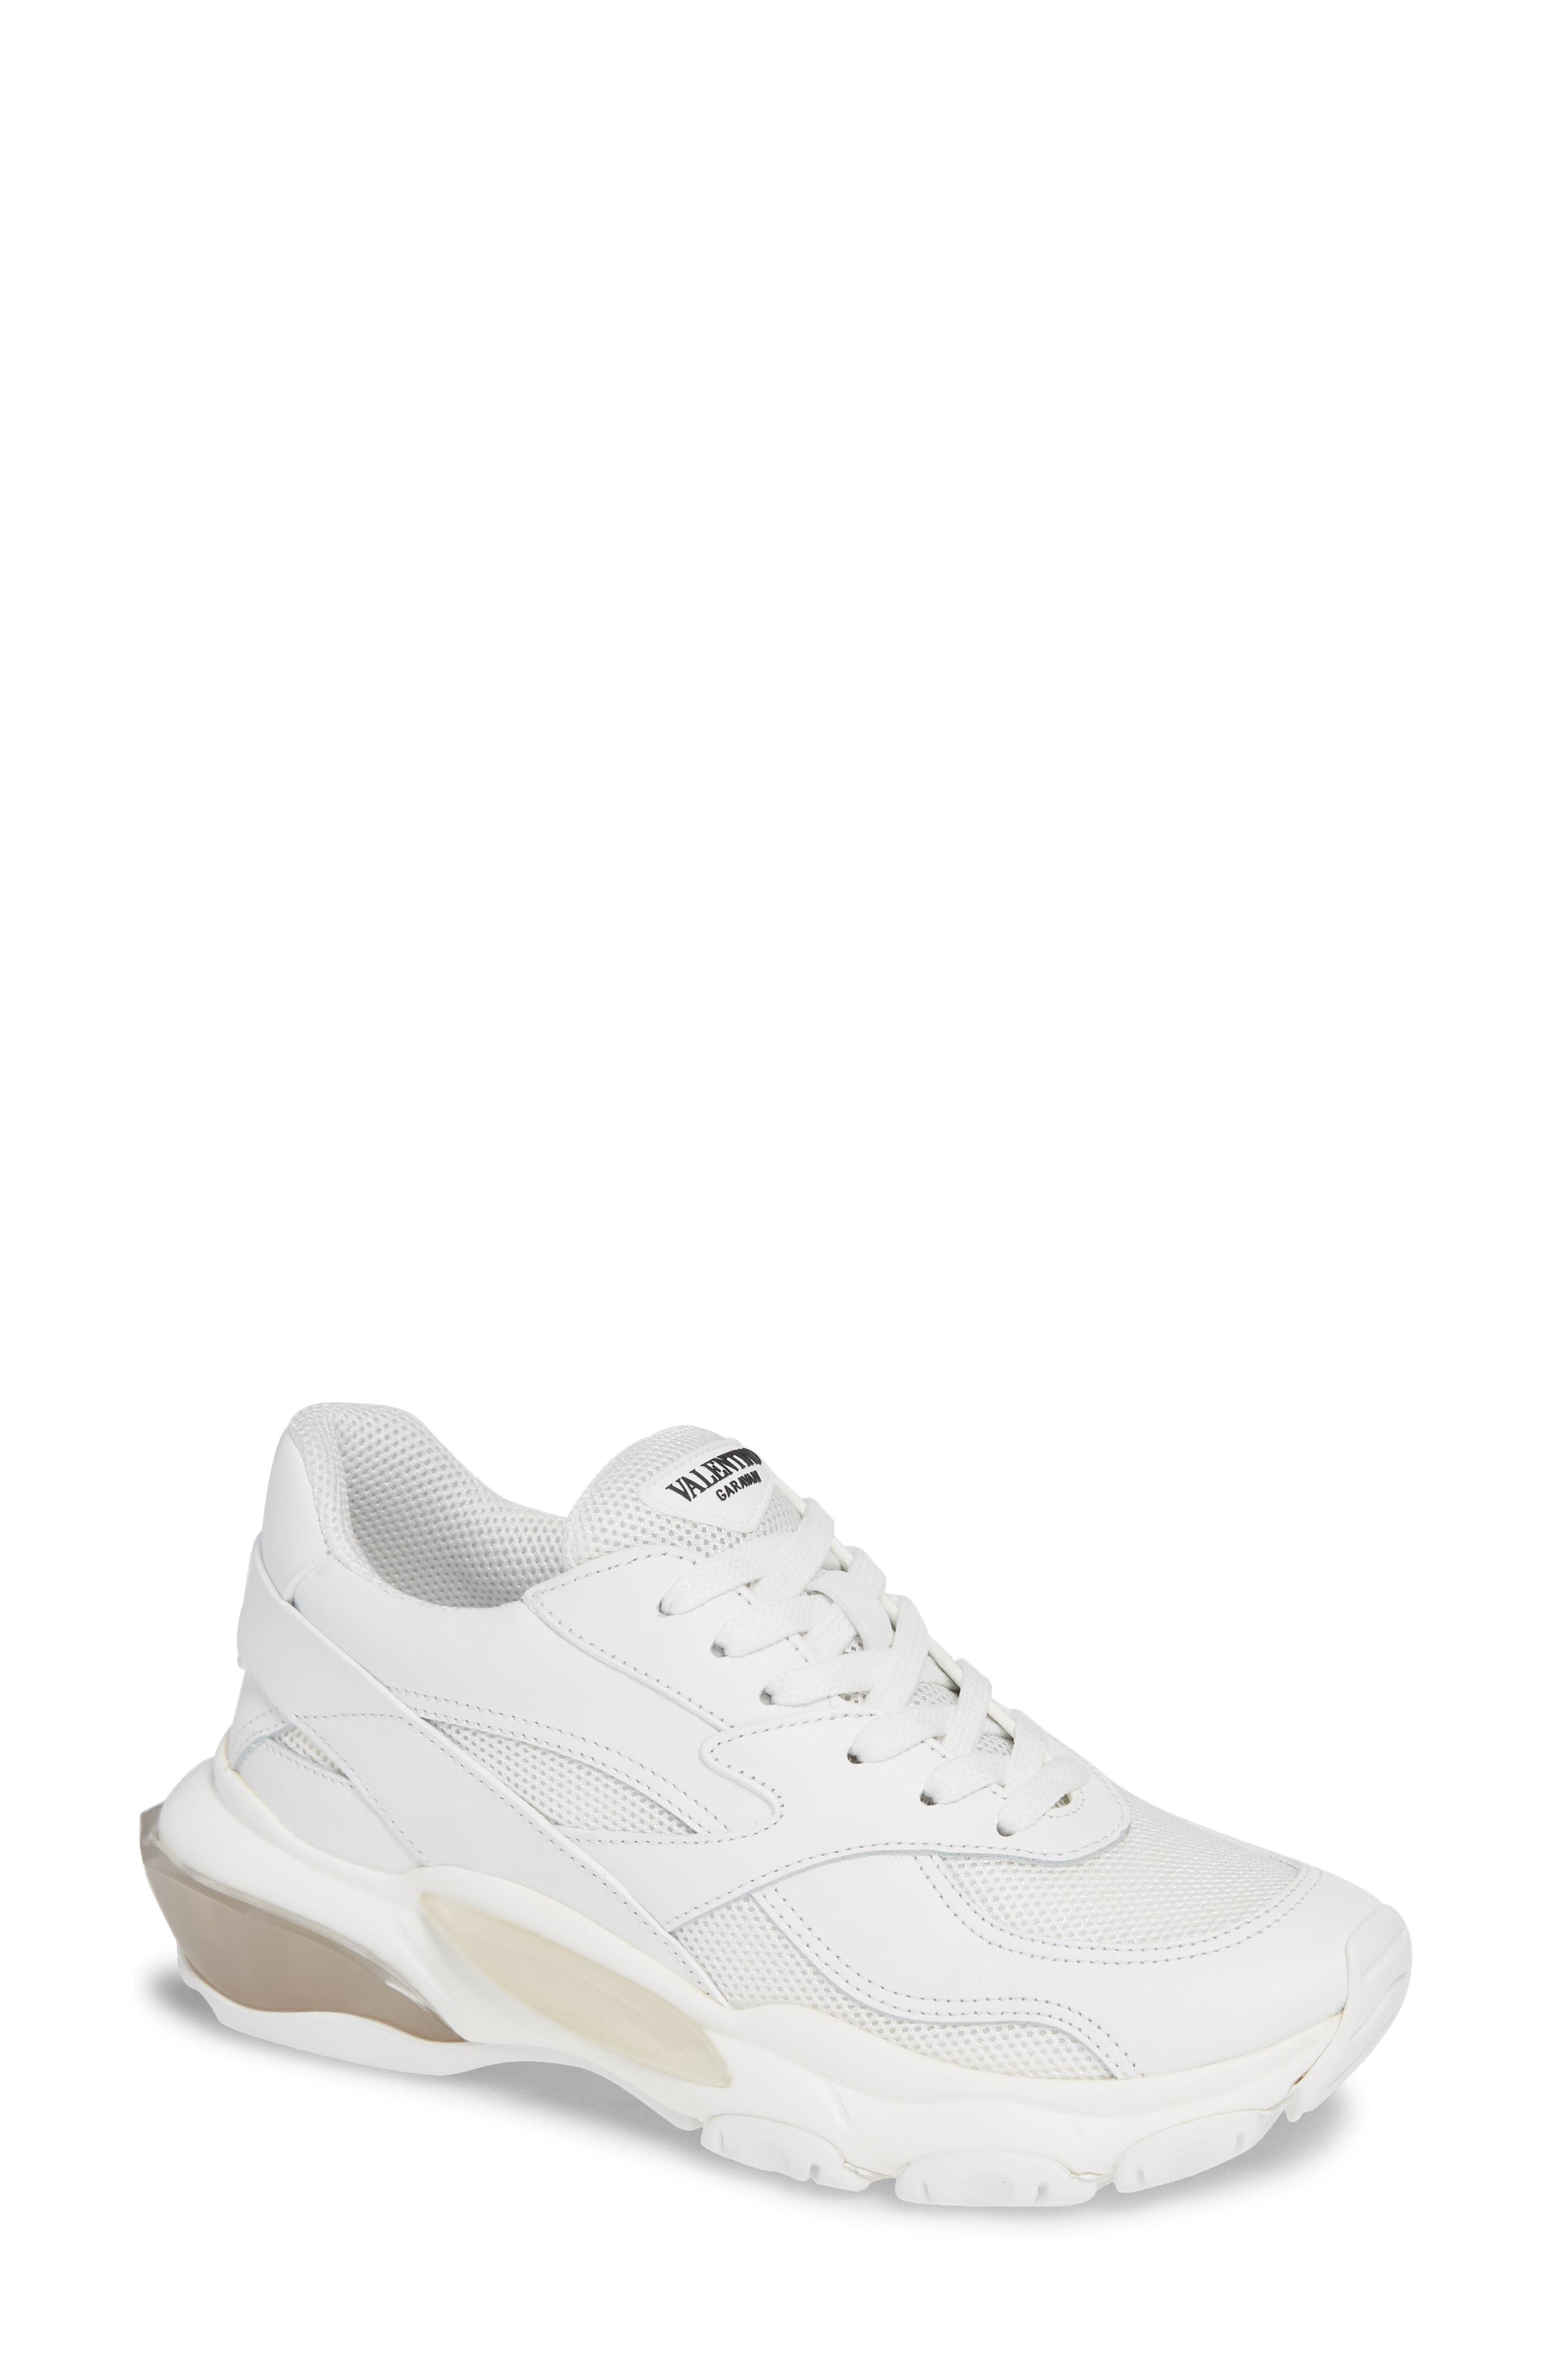 valentino bounce sneakers sale